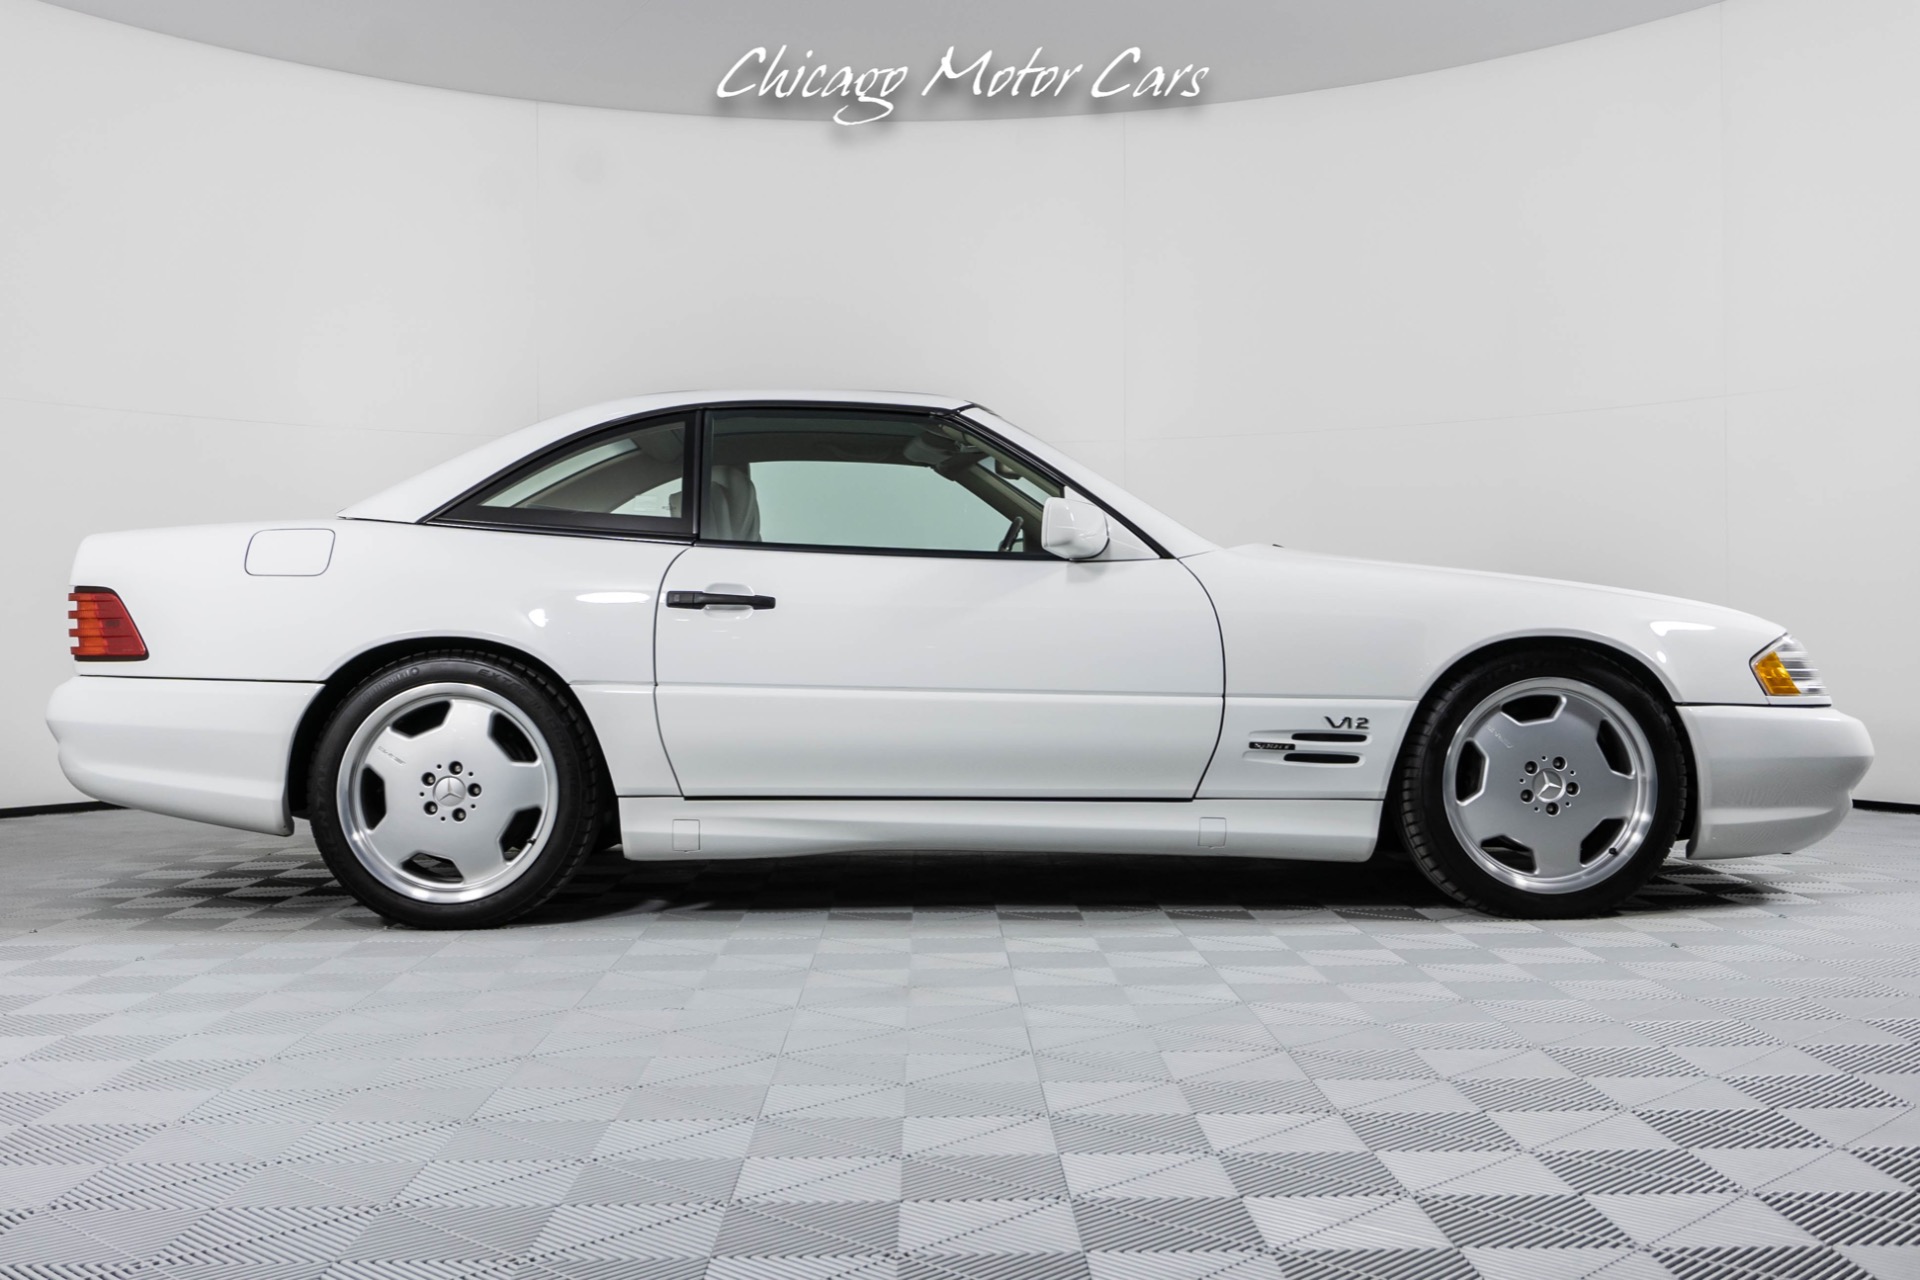 Used-1998-Mercedes-Benz-SL600-Roadster-Mint-Condition-Only-14K-Miles-Removable-Hardtop-w-Panoramic-Glass-Roof